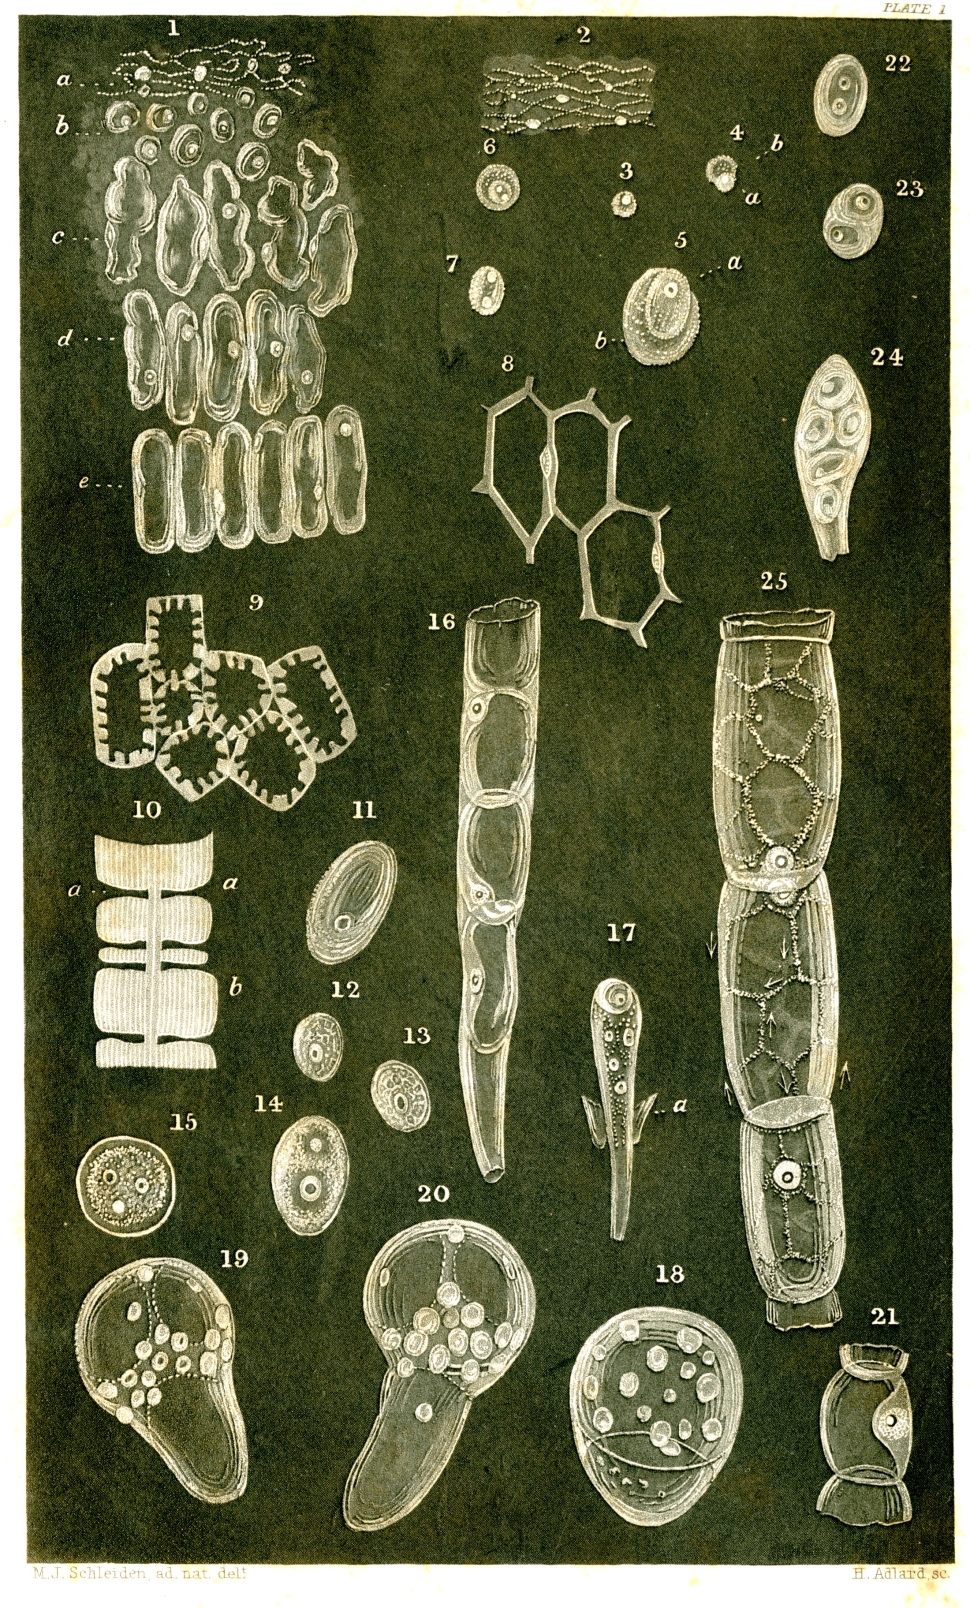 Illustrations of plant cells